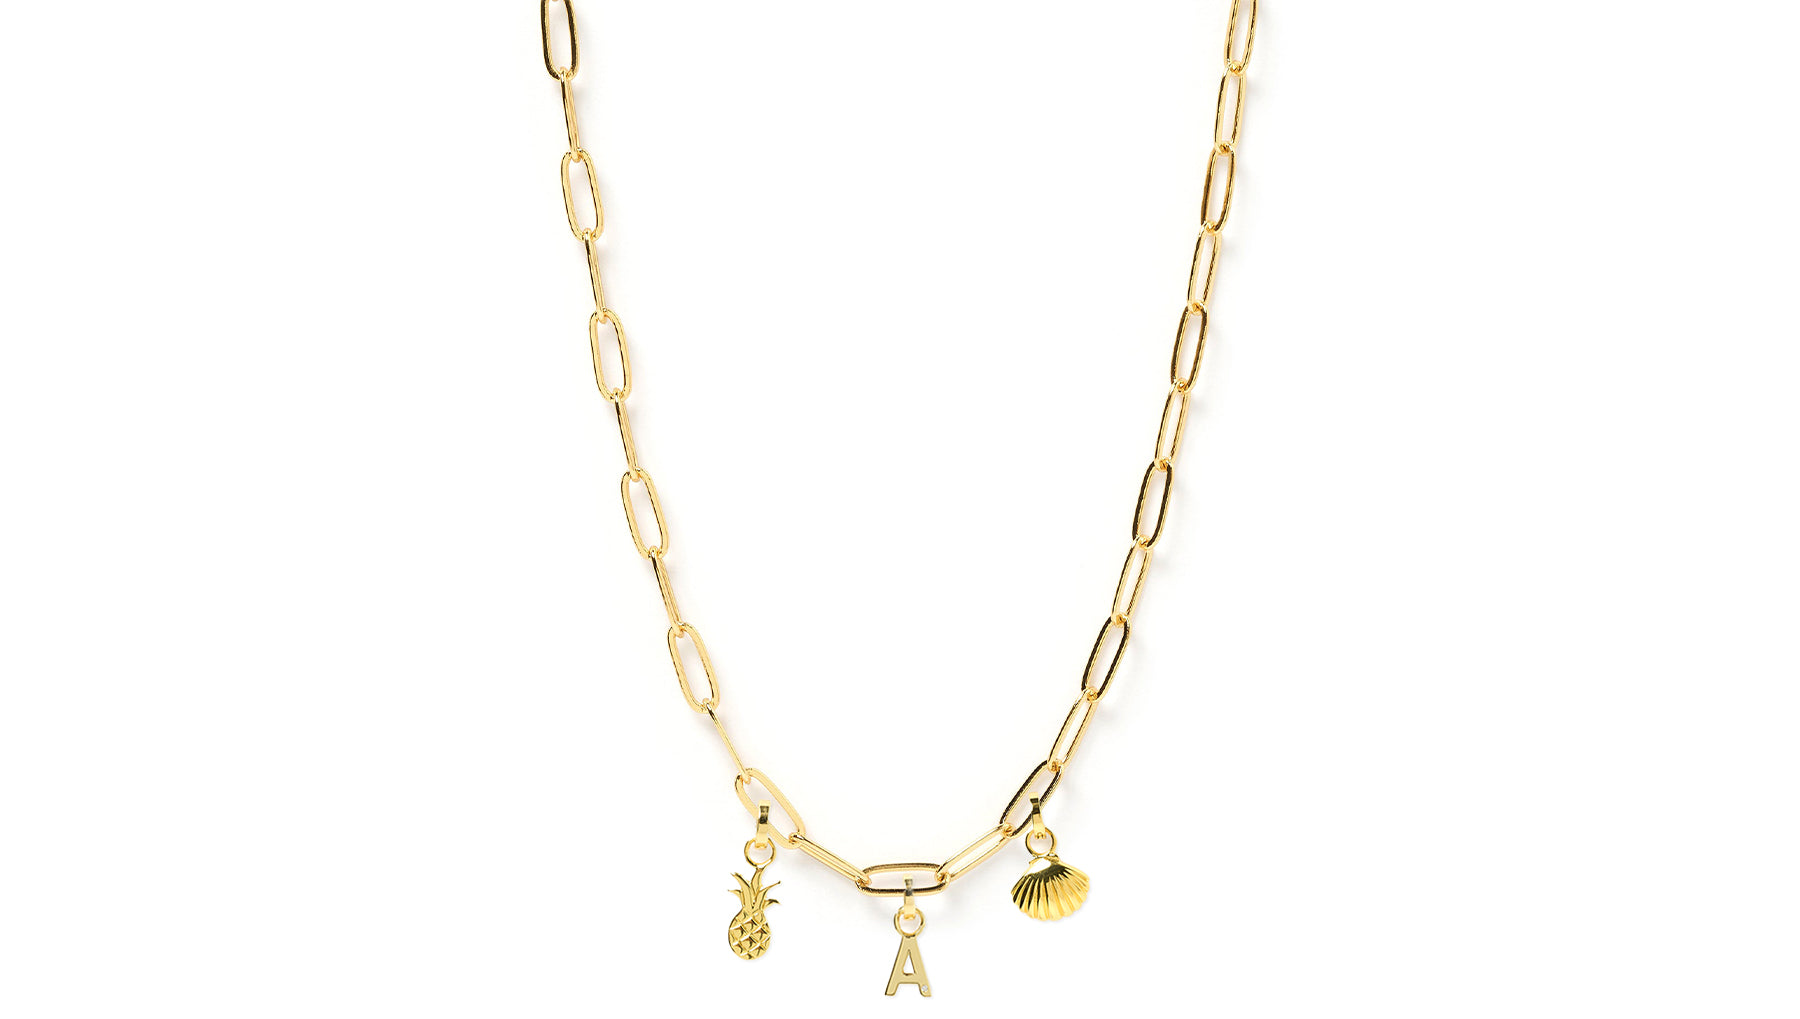 Arms Of Eve stylish Valencia gold chain necklace adorned with pineapple, shell and letter A charms